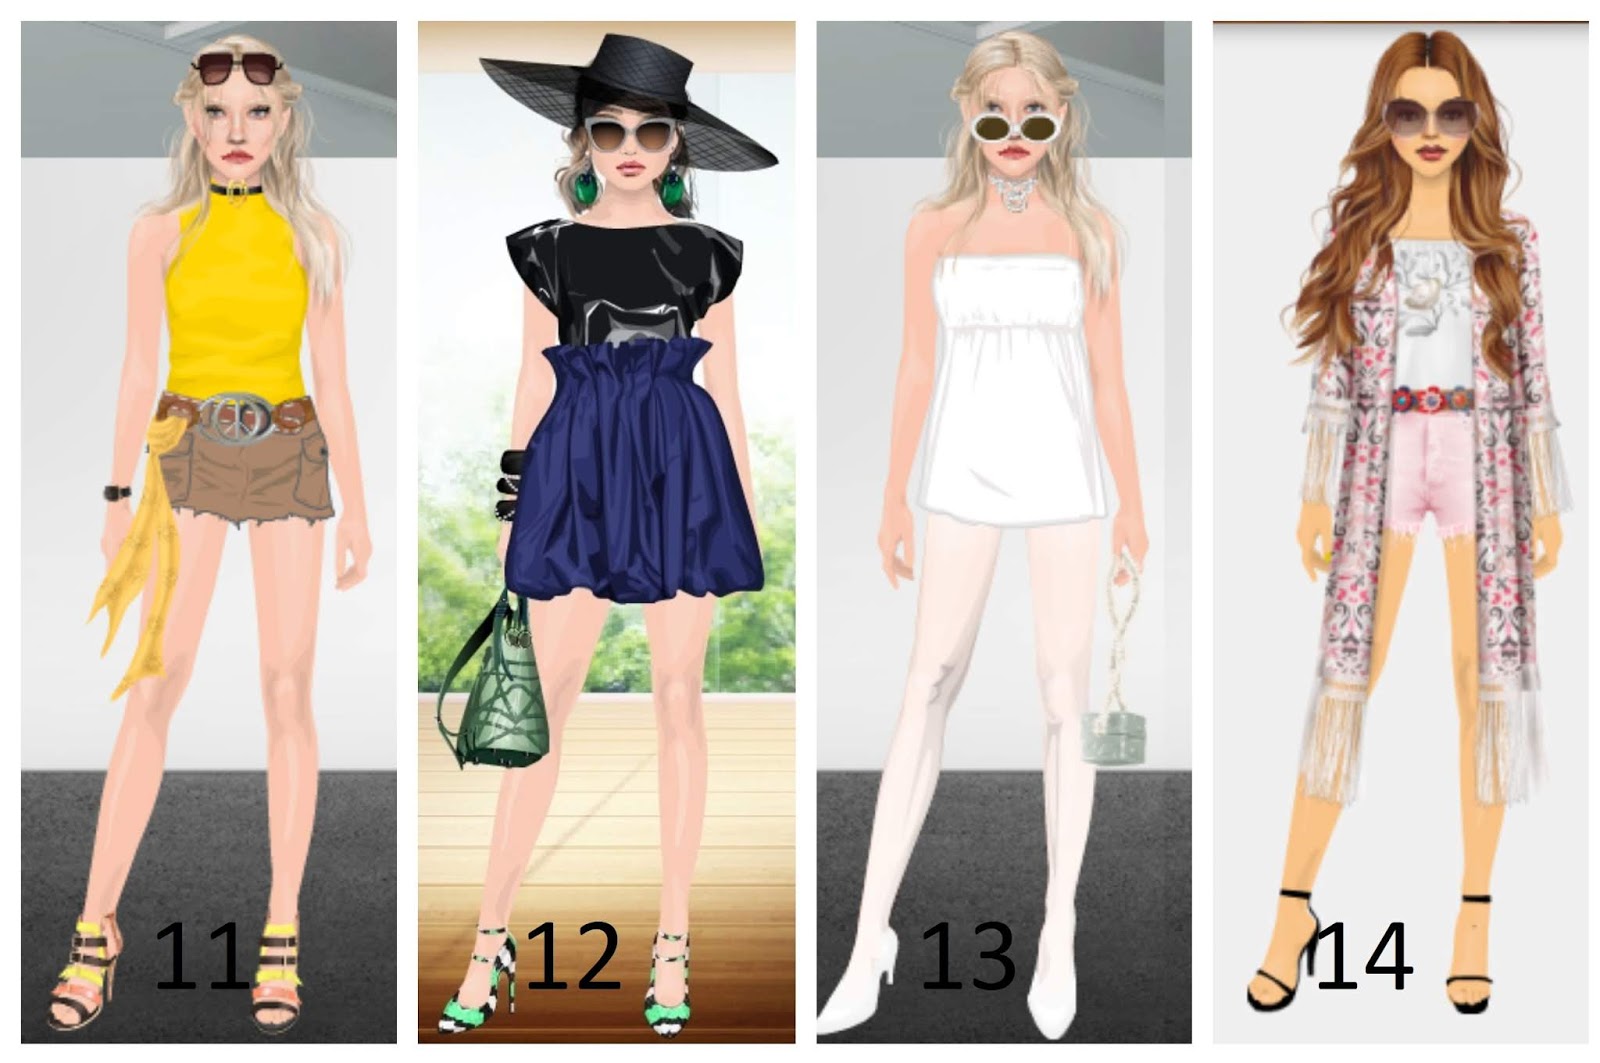 Weekend OOTD - Sexy In Sunglasses Voting - | Stardoll's Most Wanted...